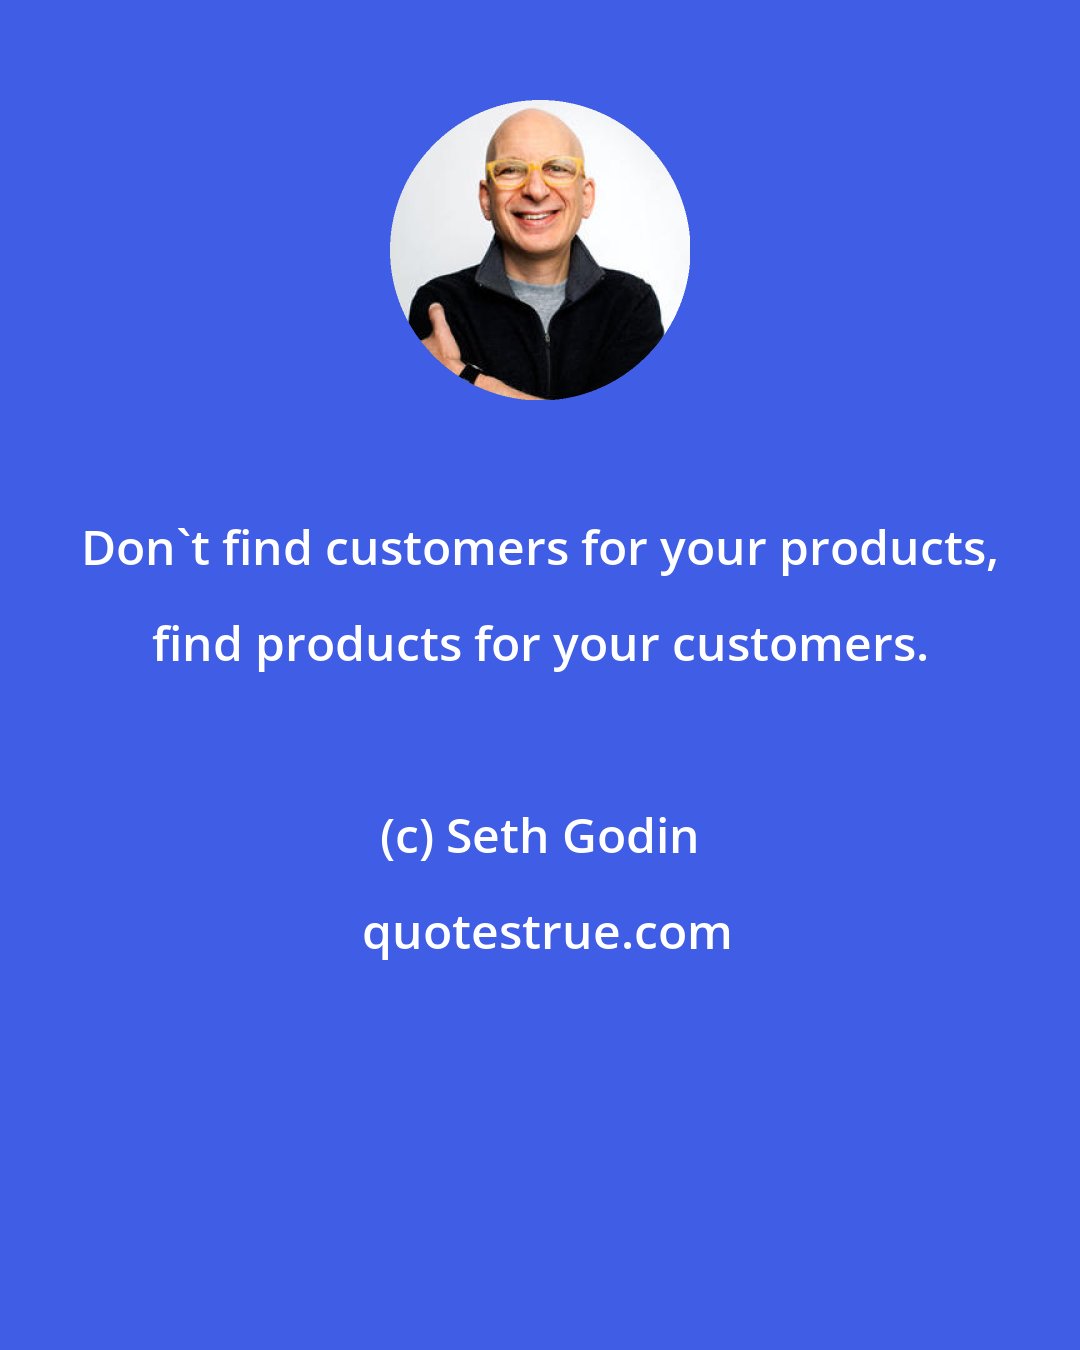 Seth Godin: Don't find customers for your products, find products for your customers.